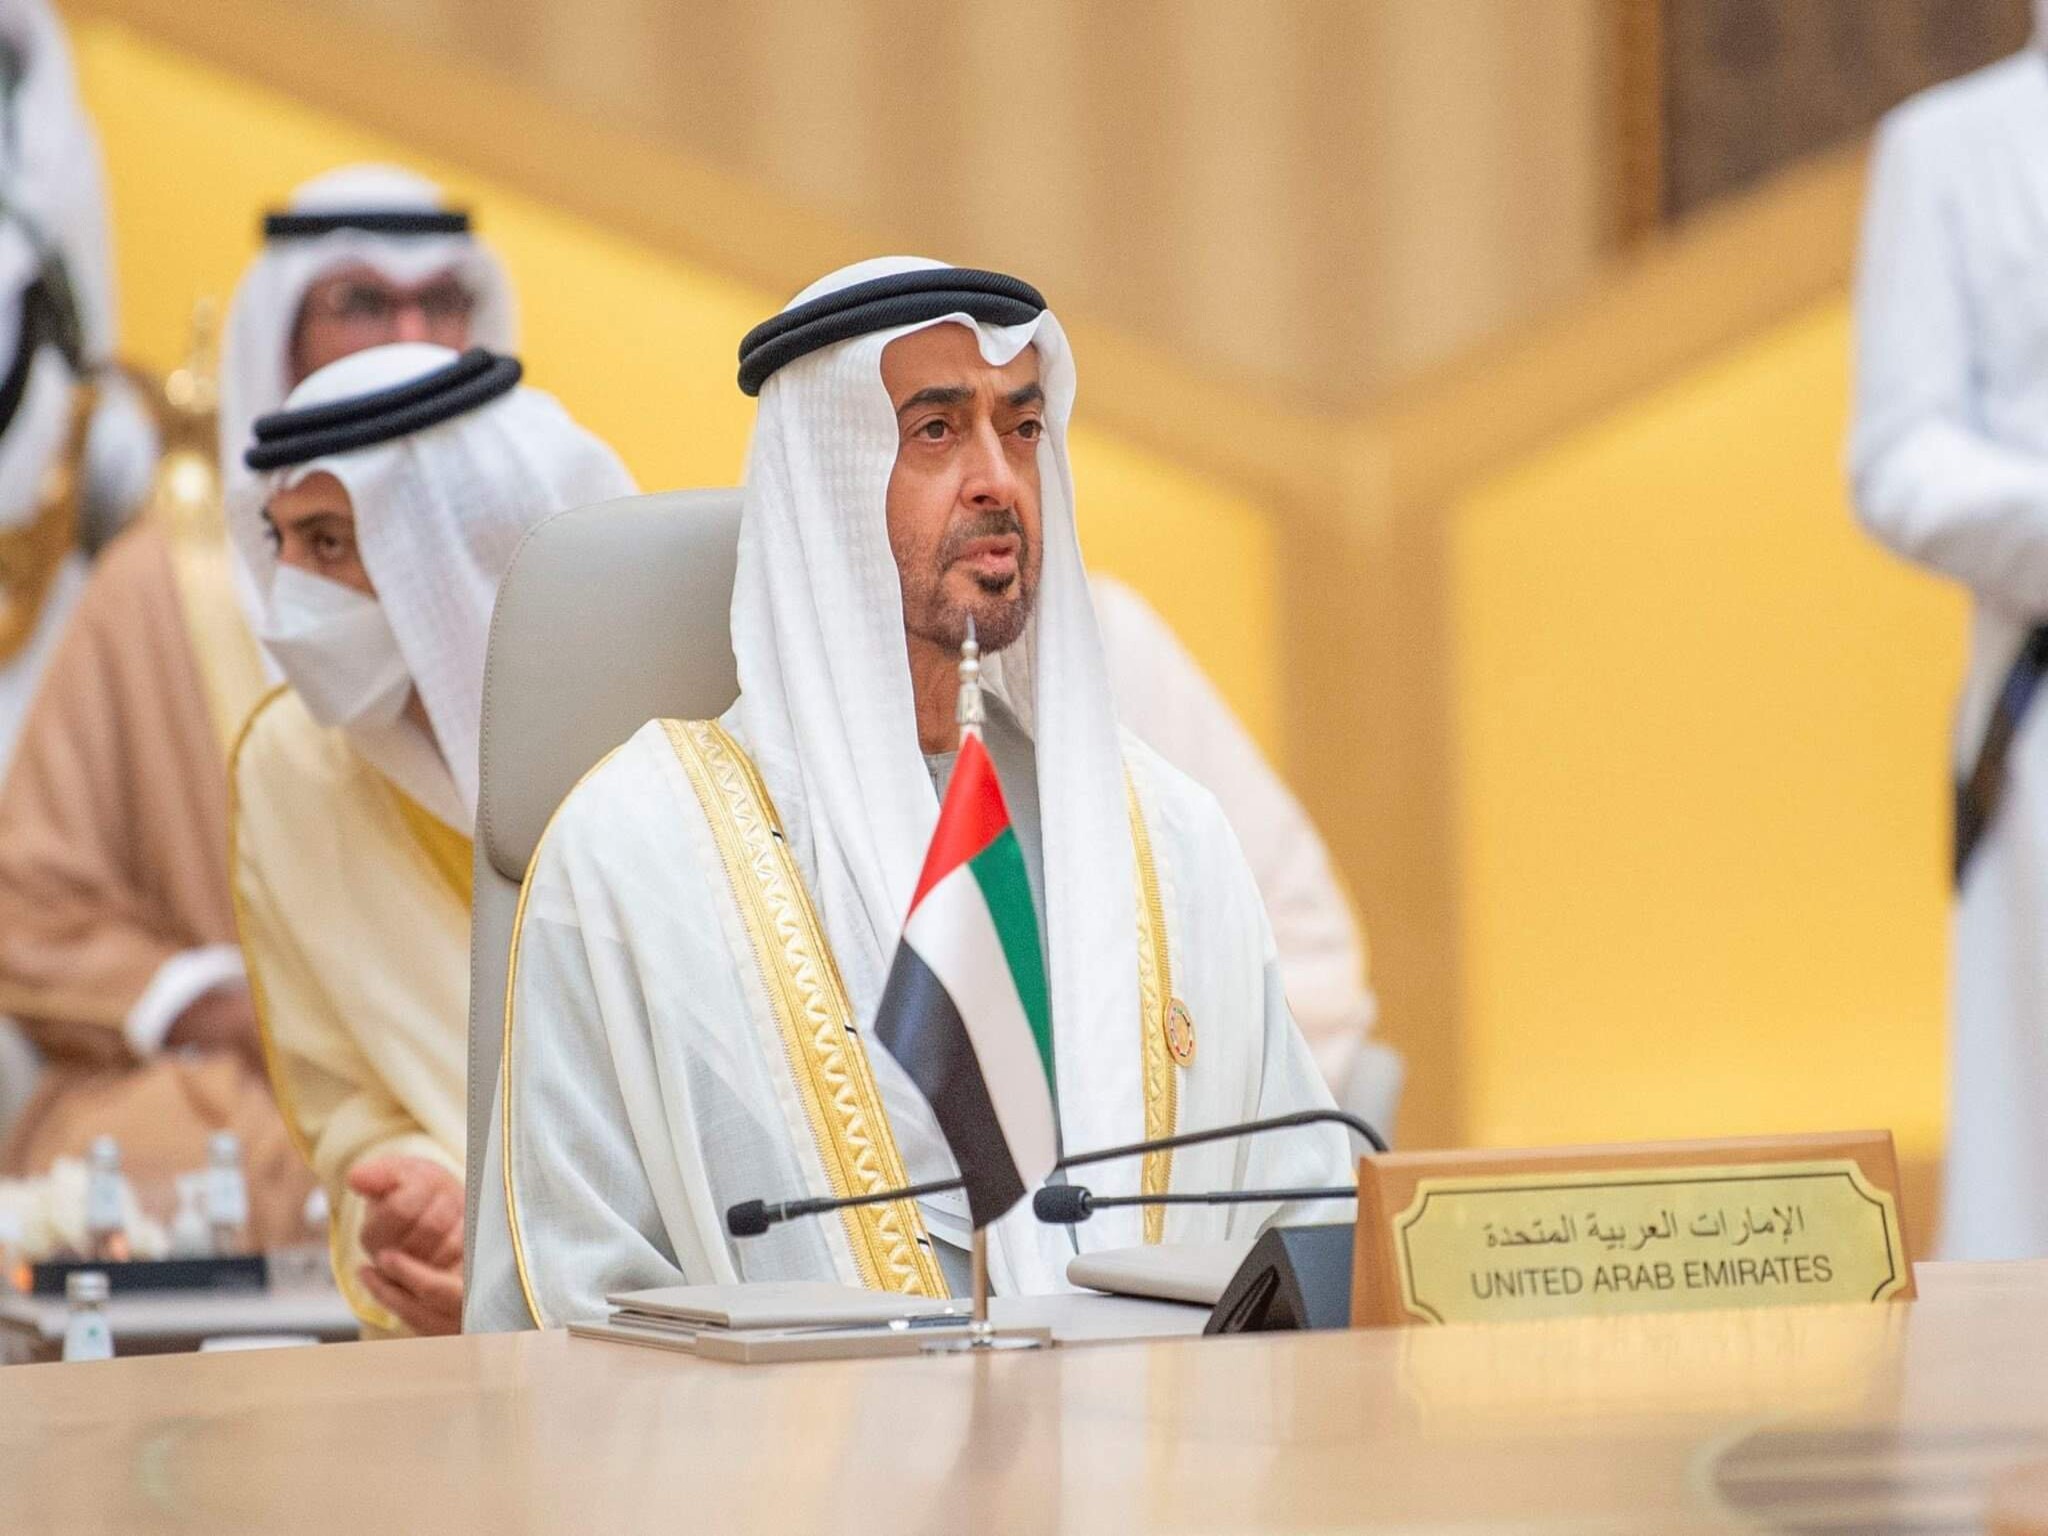 Urgent: The UAE strongly condemns and denounces the cowardly terrorist attack